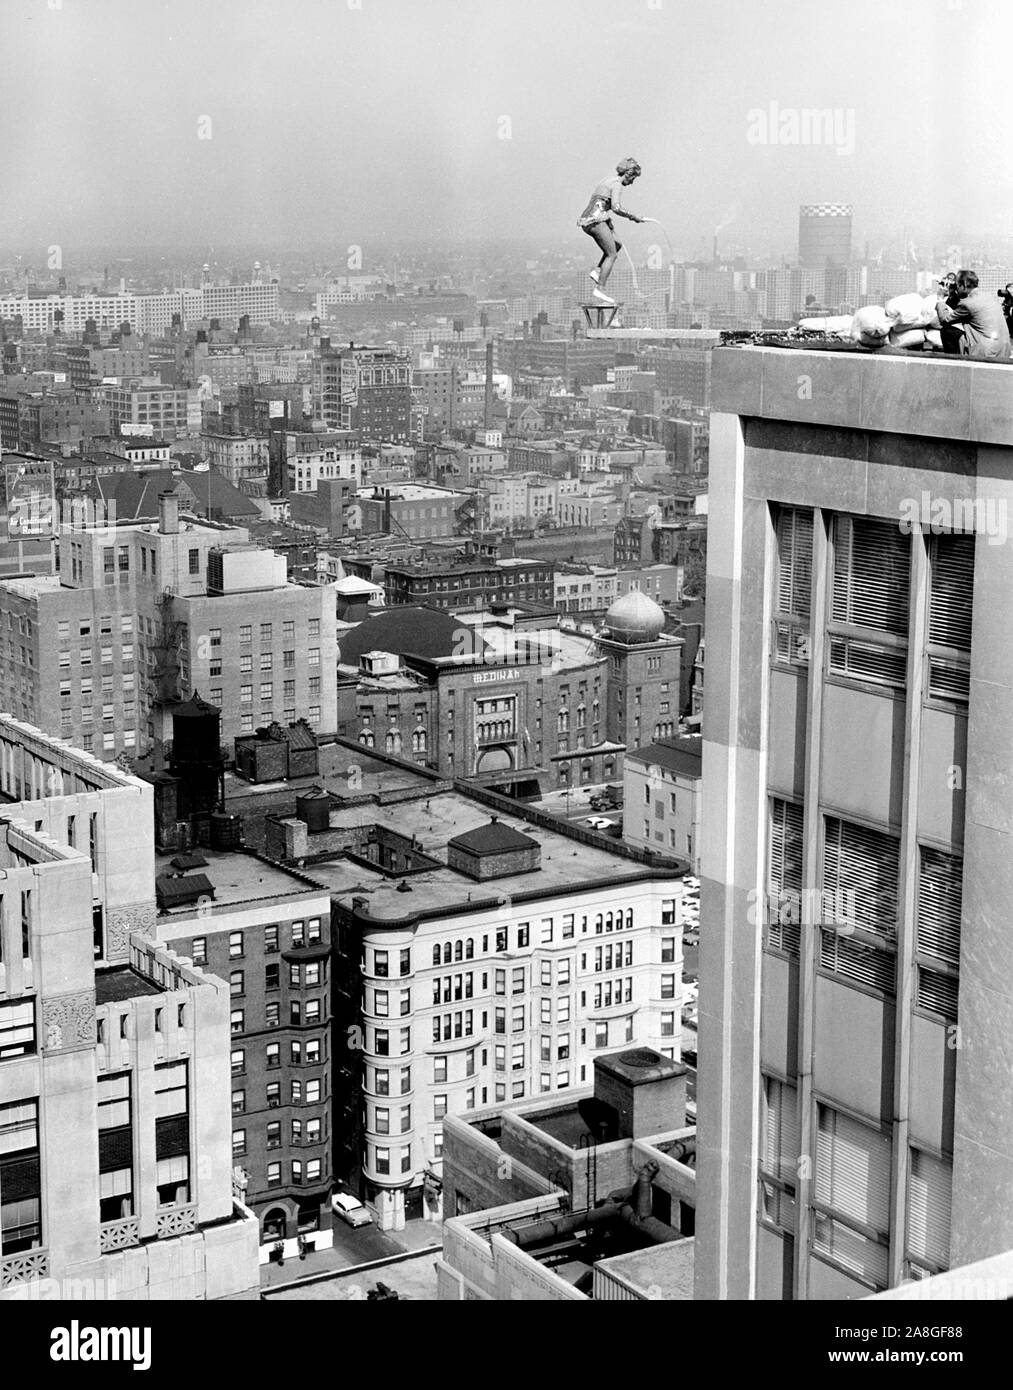 A woman jumps rope on a platform perched high on a Chicago skyscraper on the city's north side, ca. 1960. Stock Photo